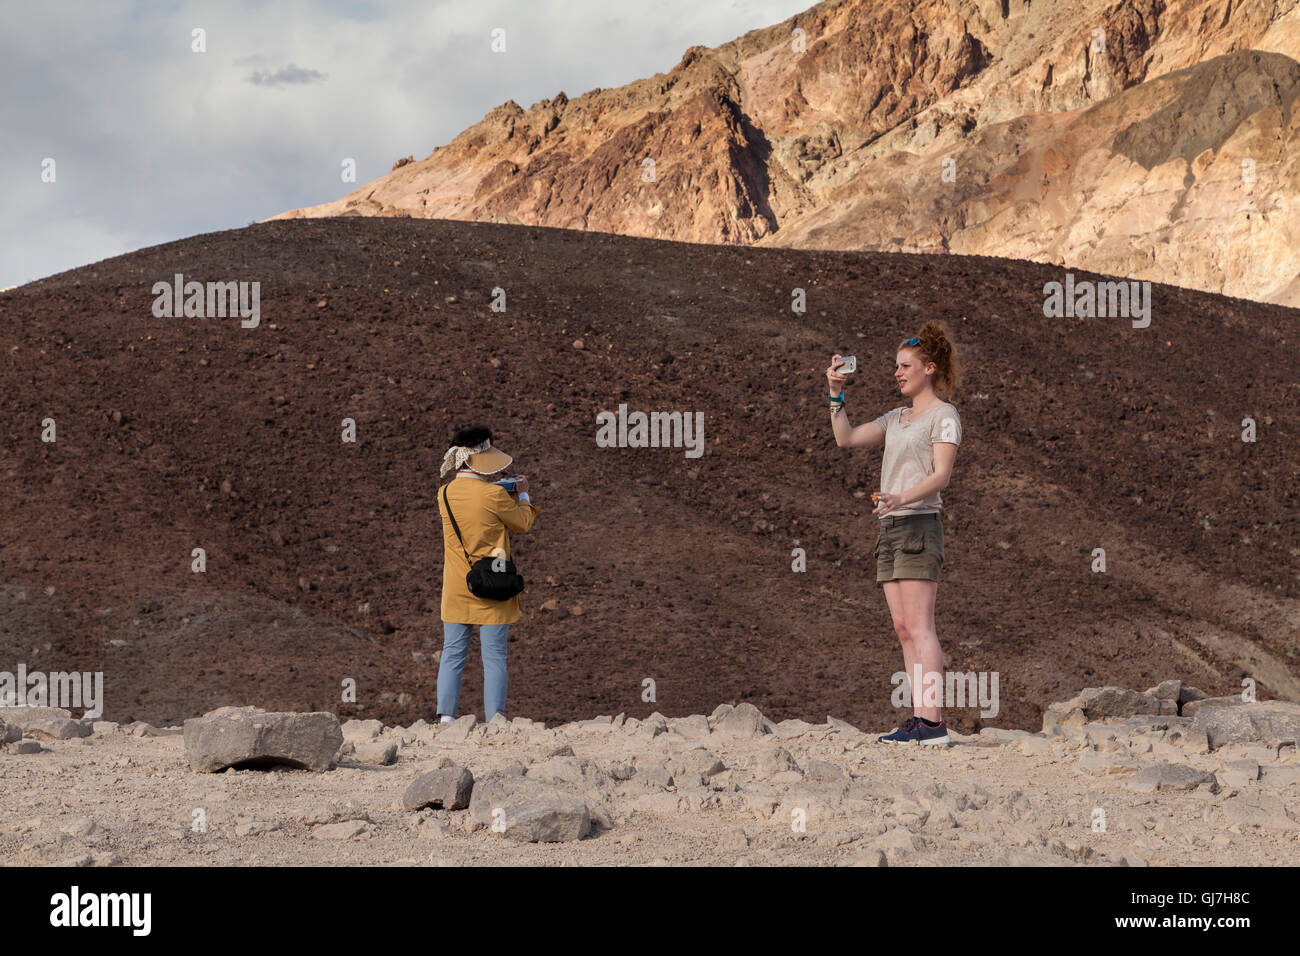 Woman taking selfies by the volcanic and sedimentary hills near Artist's Palette in Death Valley National Park, California, USA Stock Photo